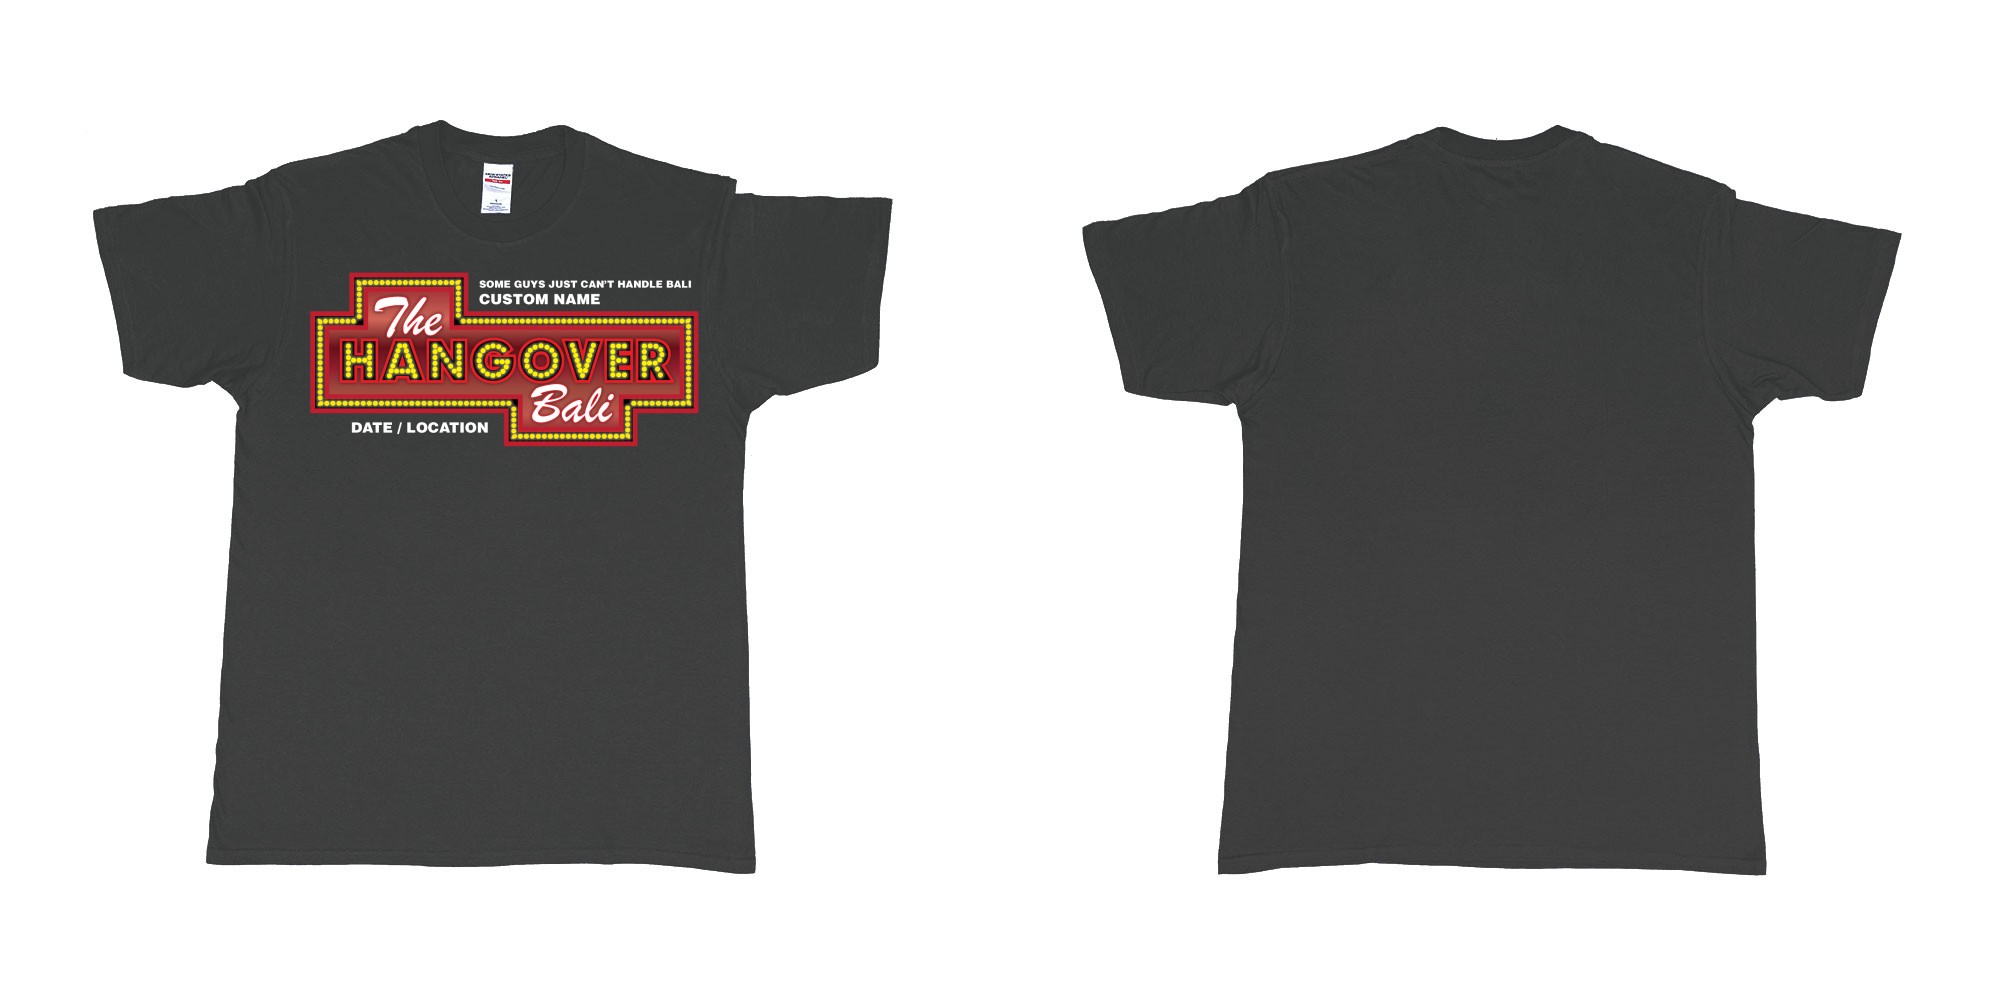 Custom tshirt design the hangover bali tour custom printing own name in fabric color black choice your own text made in Bali by The Pirate Way